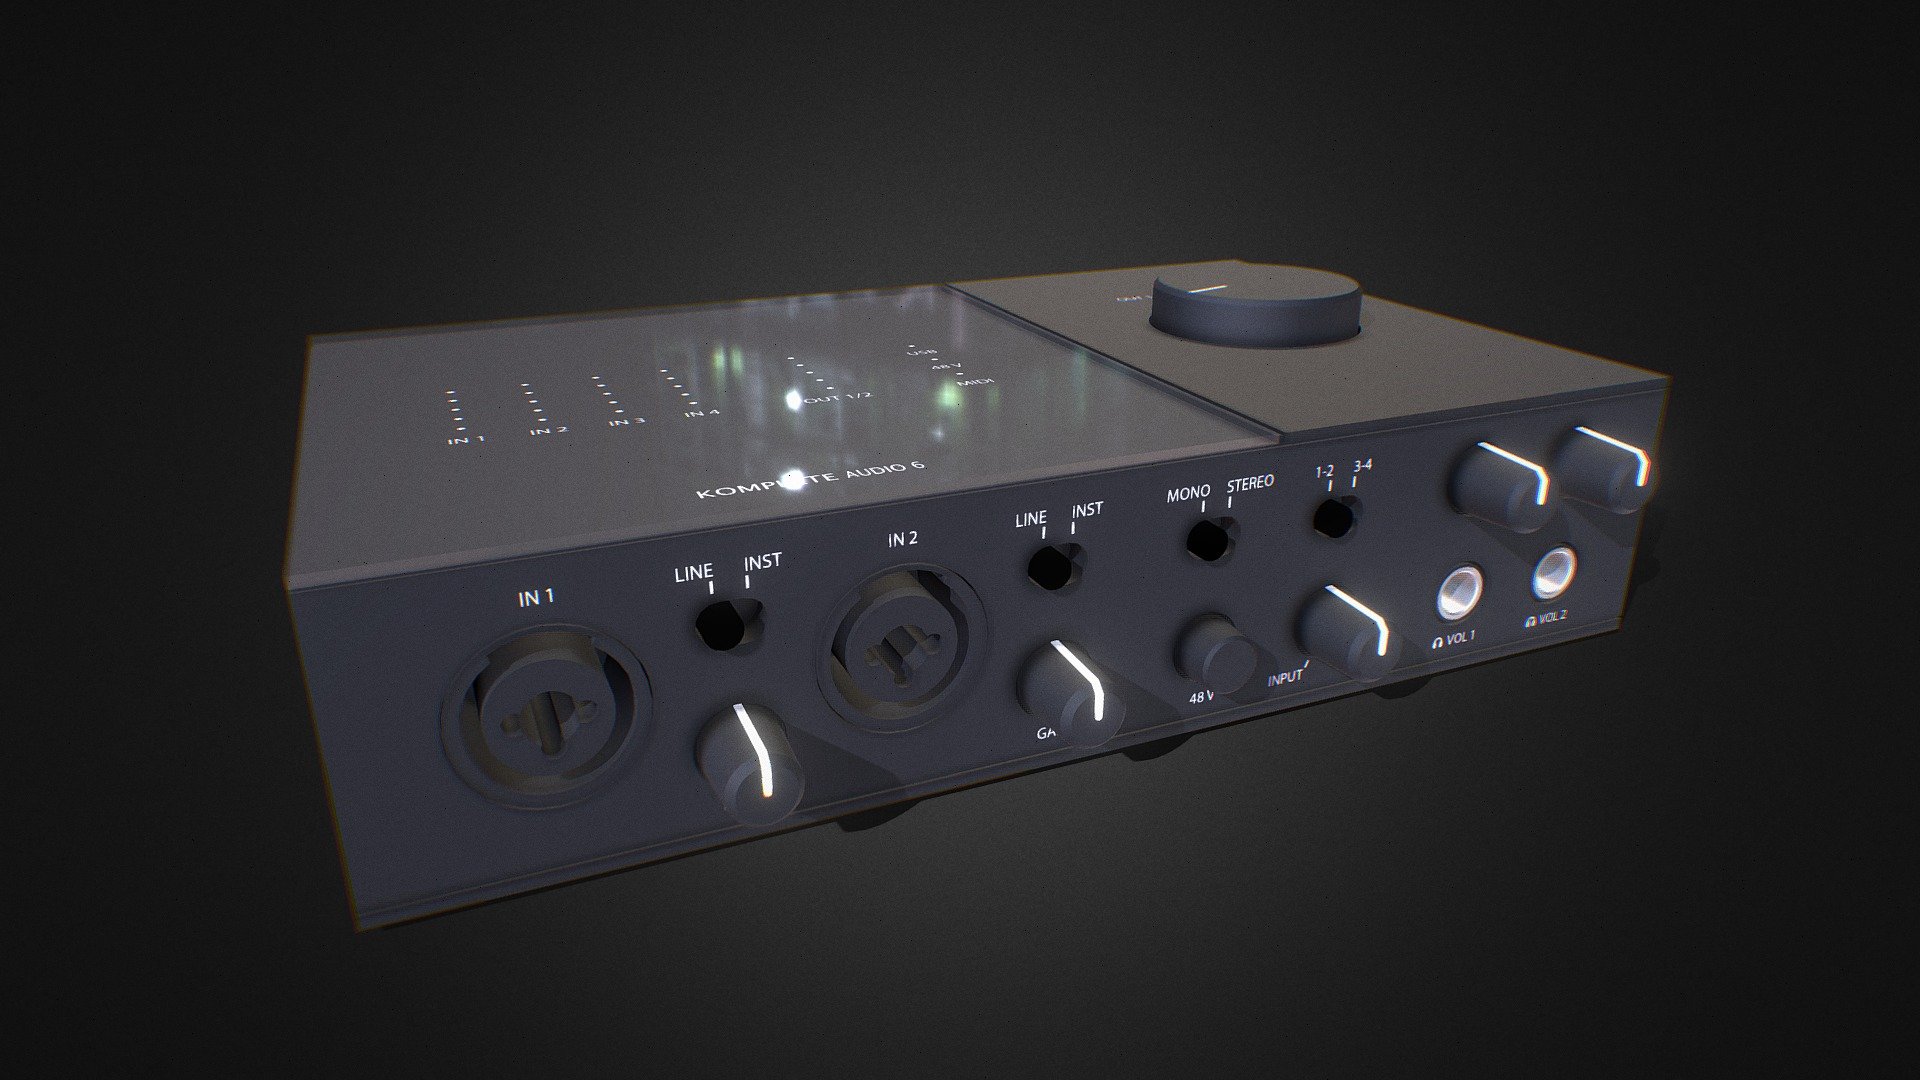 Also here I tried to create an even more complex 3d-model. :)

This is a 3d model of the komplete audio 6 audio interface by native-instruments.
It uses 8k resolution textures which are all made in blender and photoshop (no photoscan) 3d model